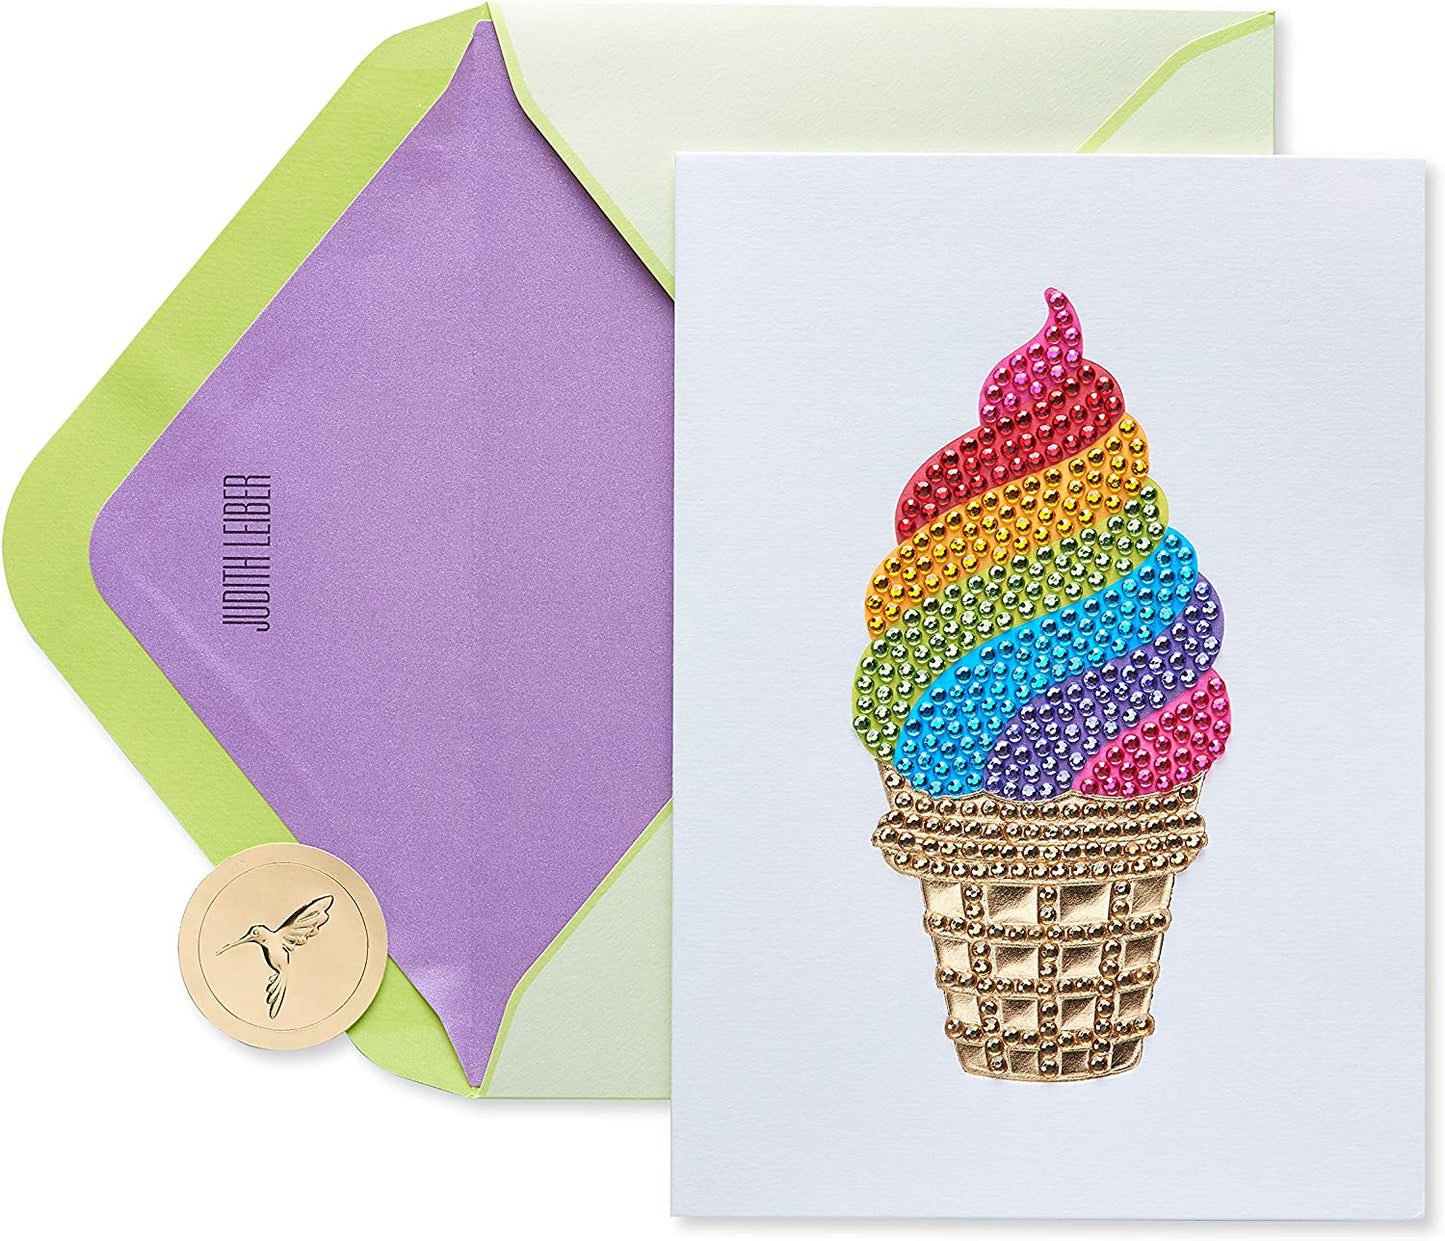 Papyrus Birthday Card - Designed by Judith Leiber (Every Color of Happiness)